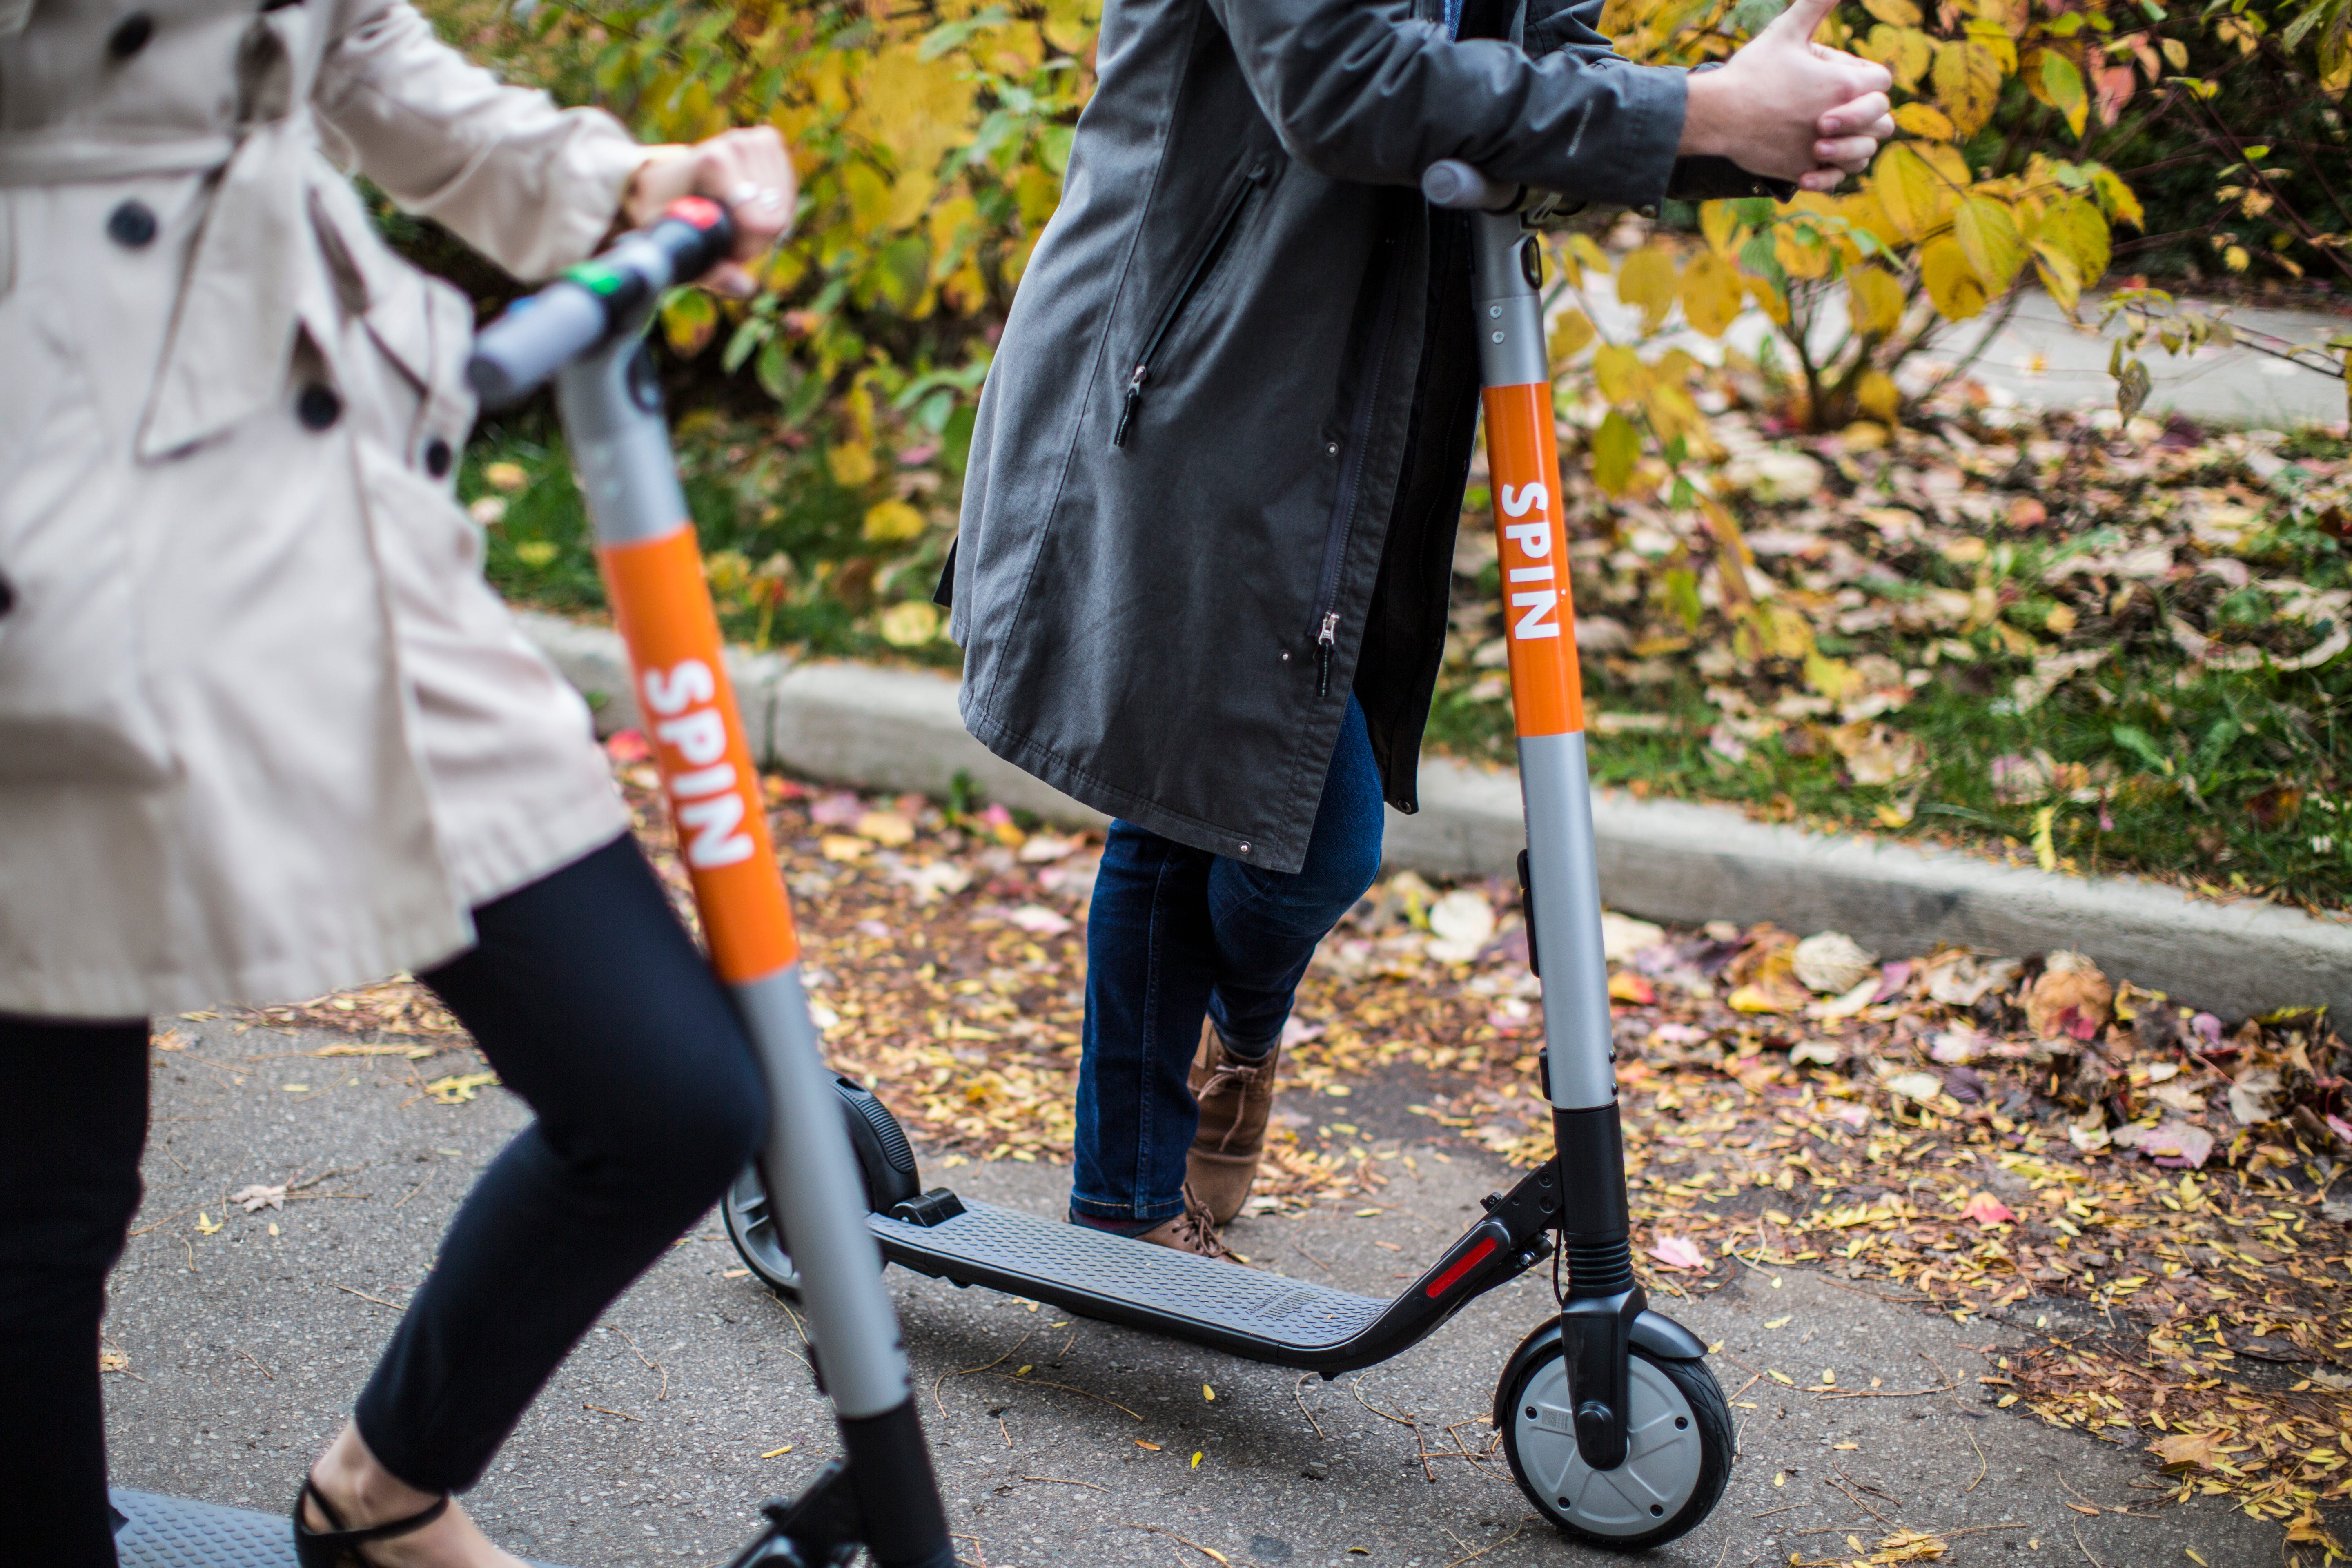 Ford Motor Co. has acquired electric scooter company Spin, and will launch them in Detroit immediately